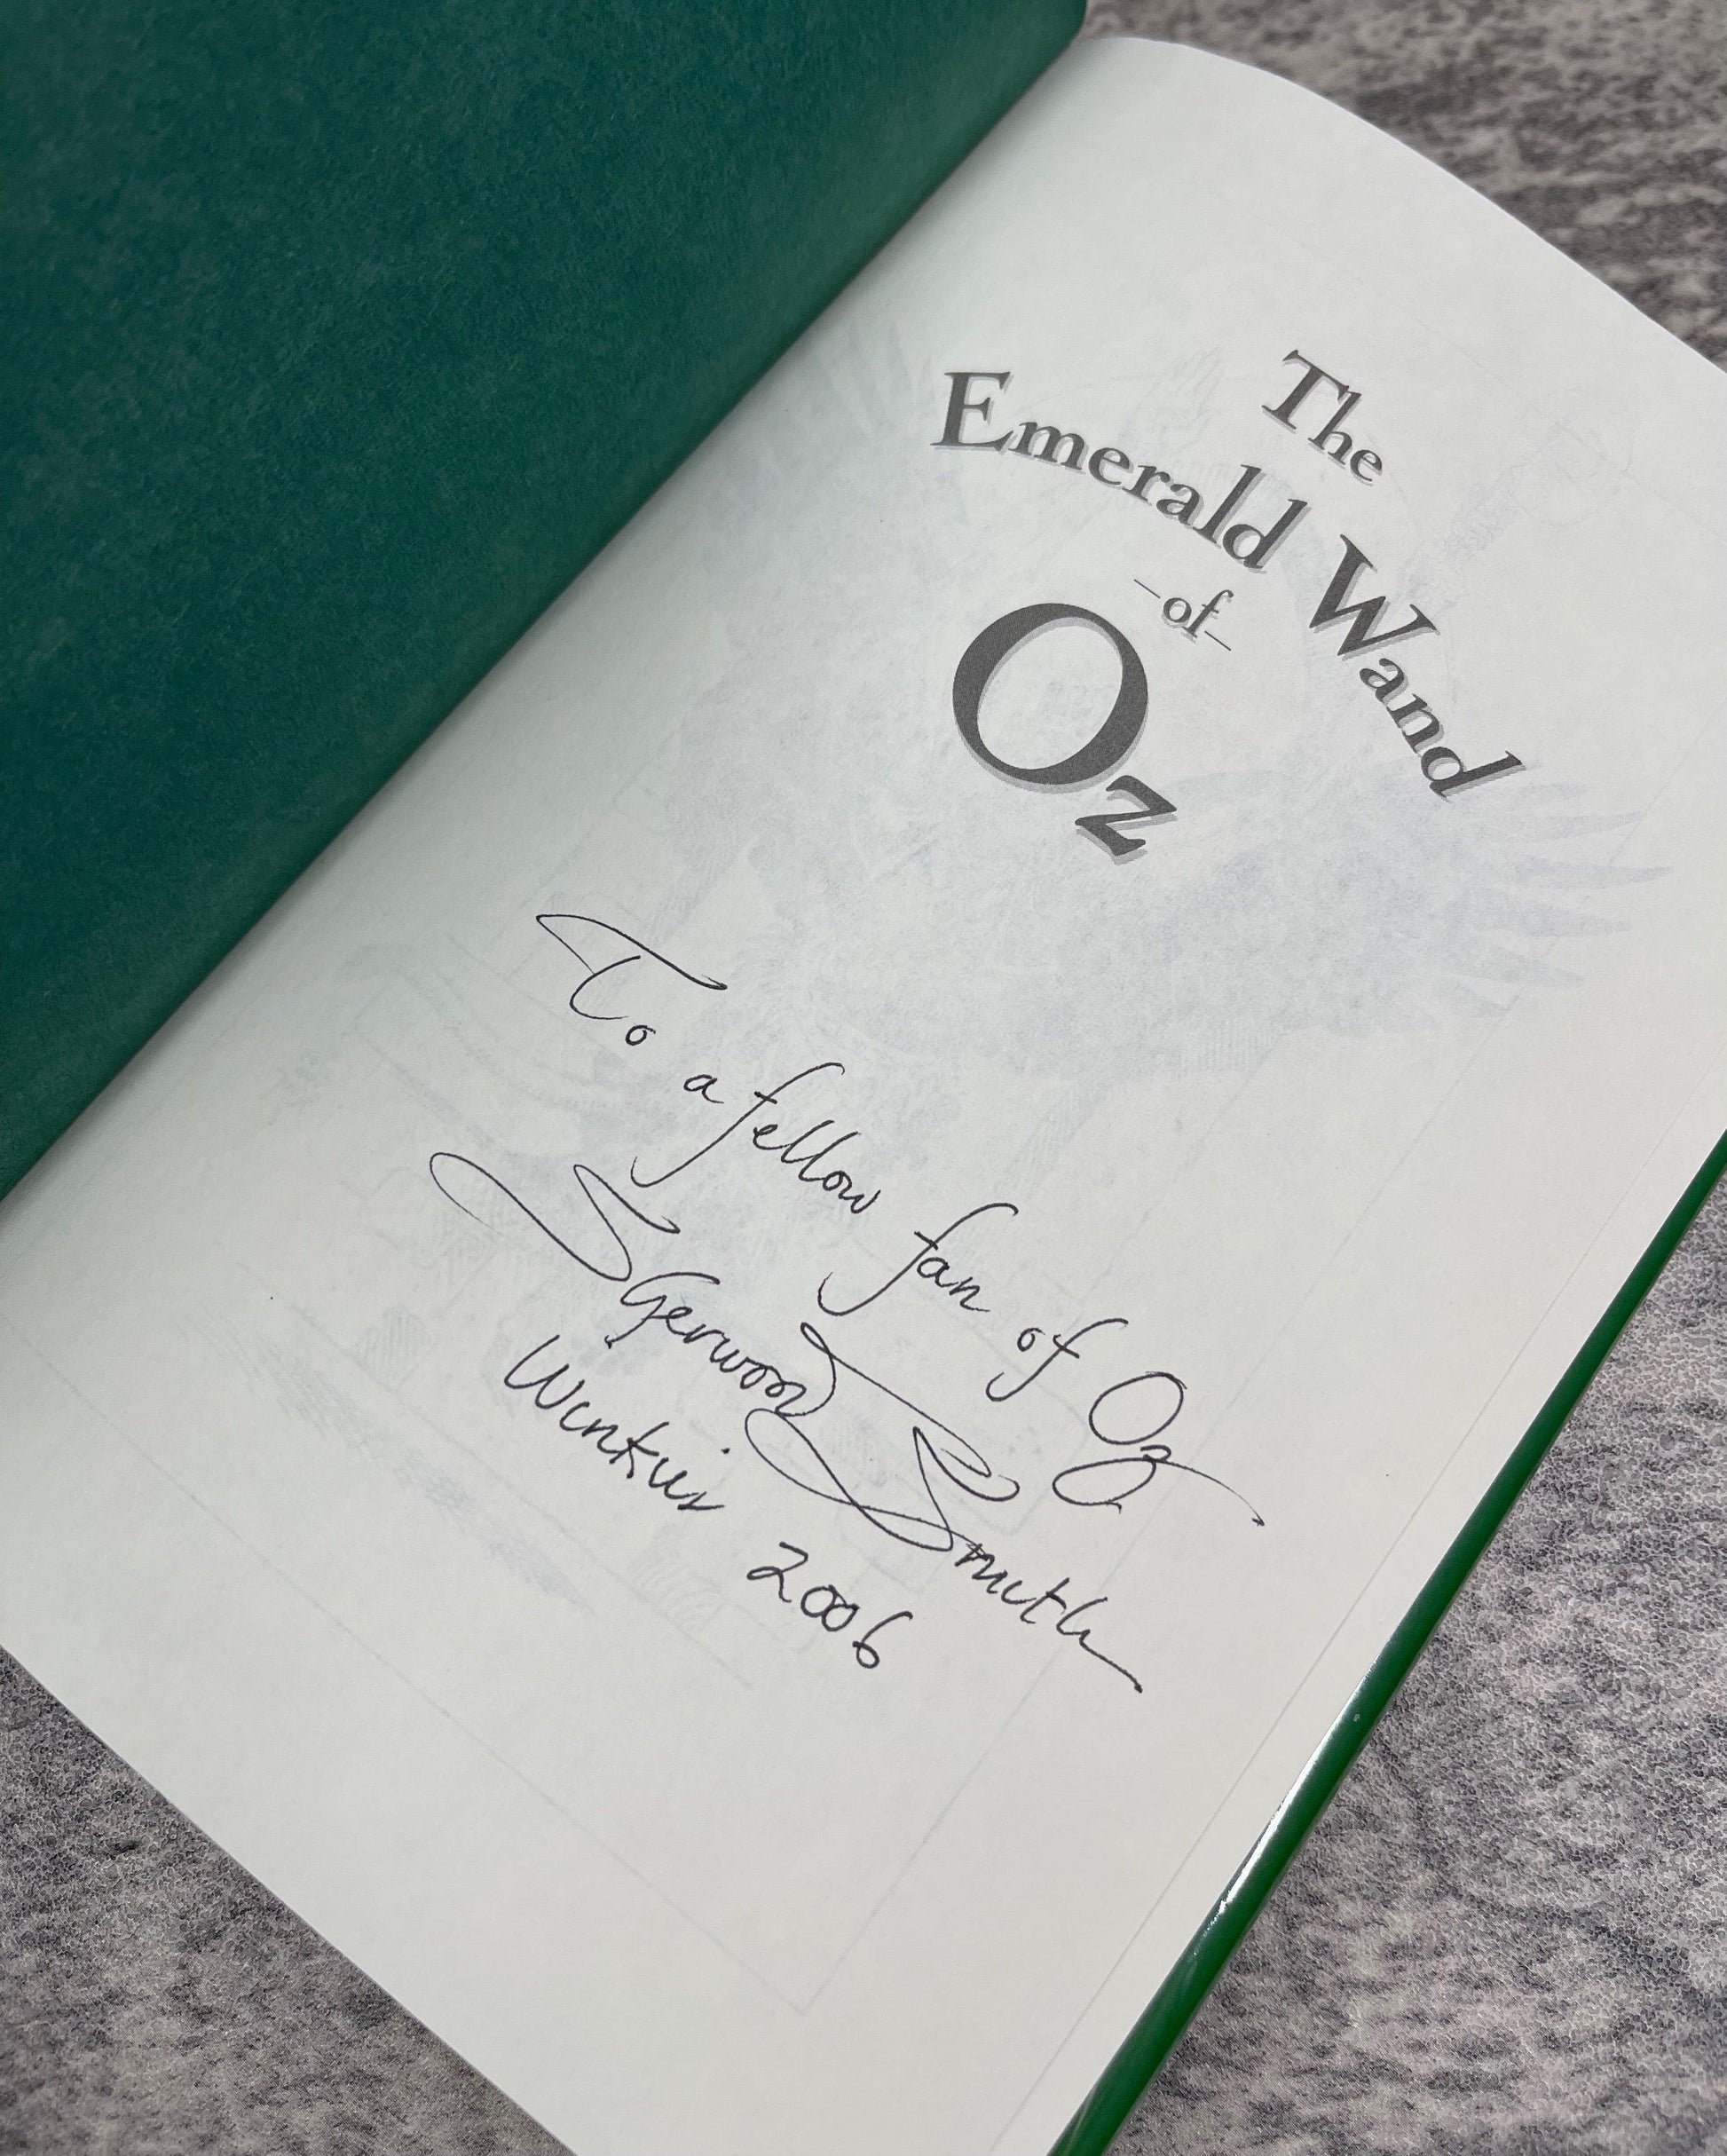 The Emerald Wand of Oz / Signed 1st Edition / 2005 - Precious Cache